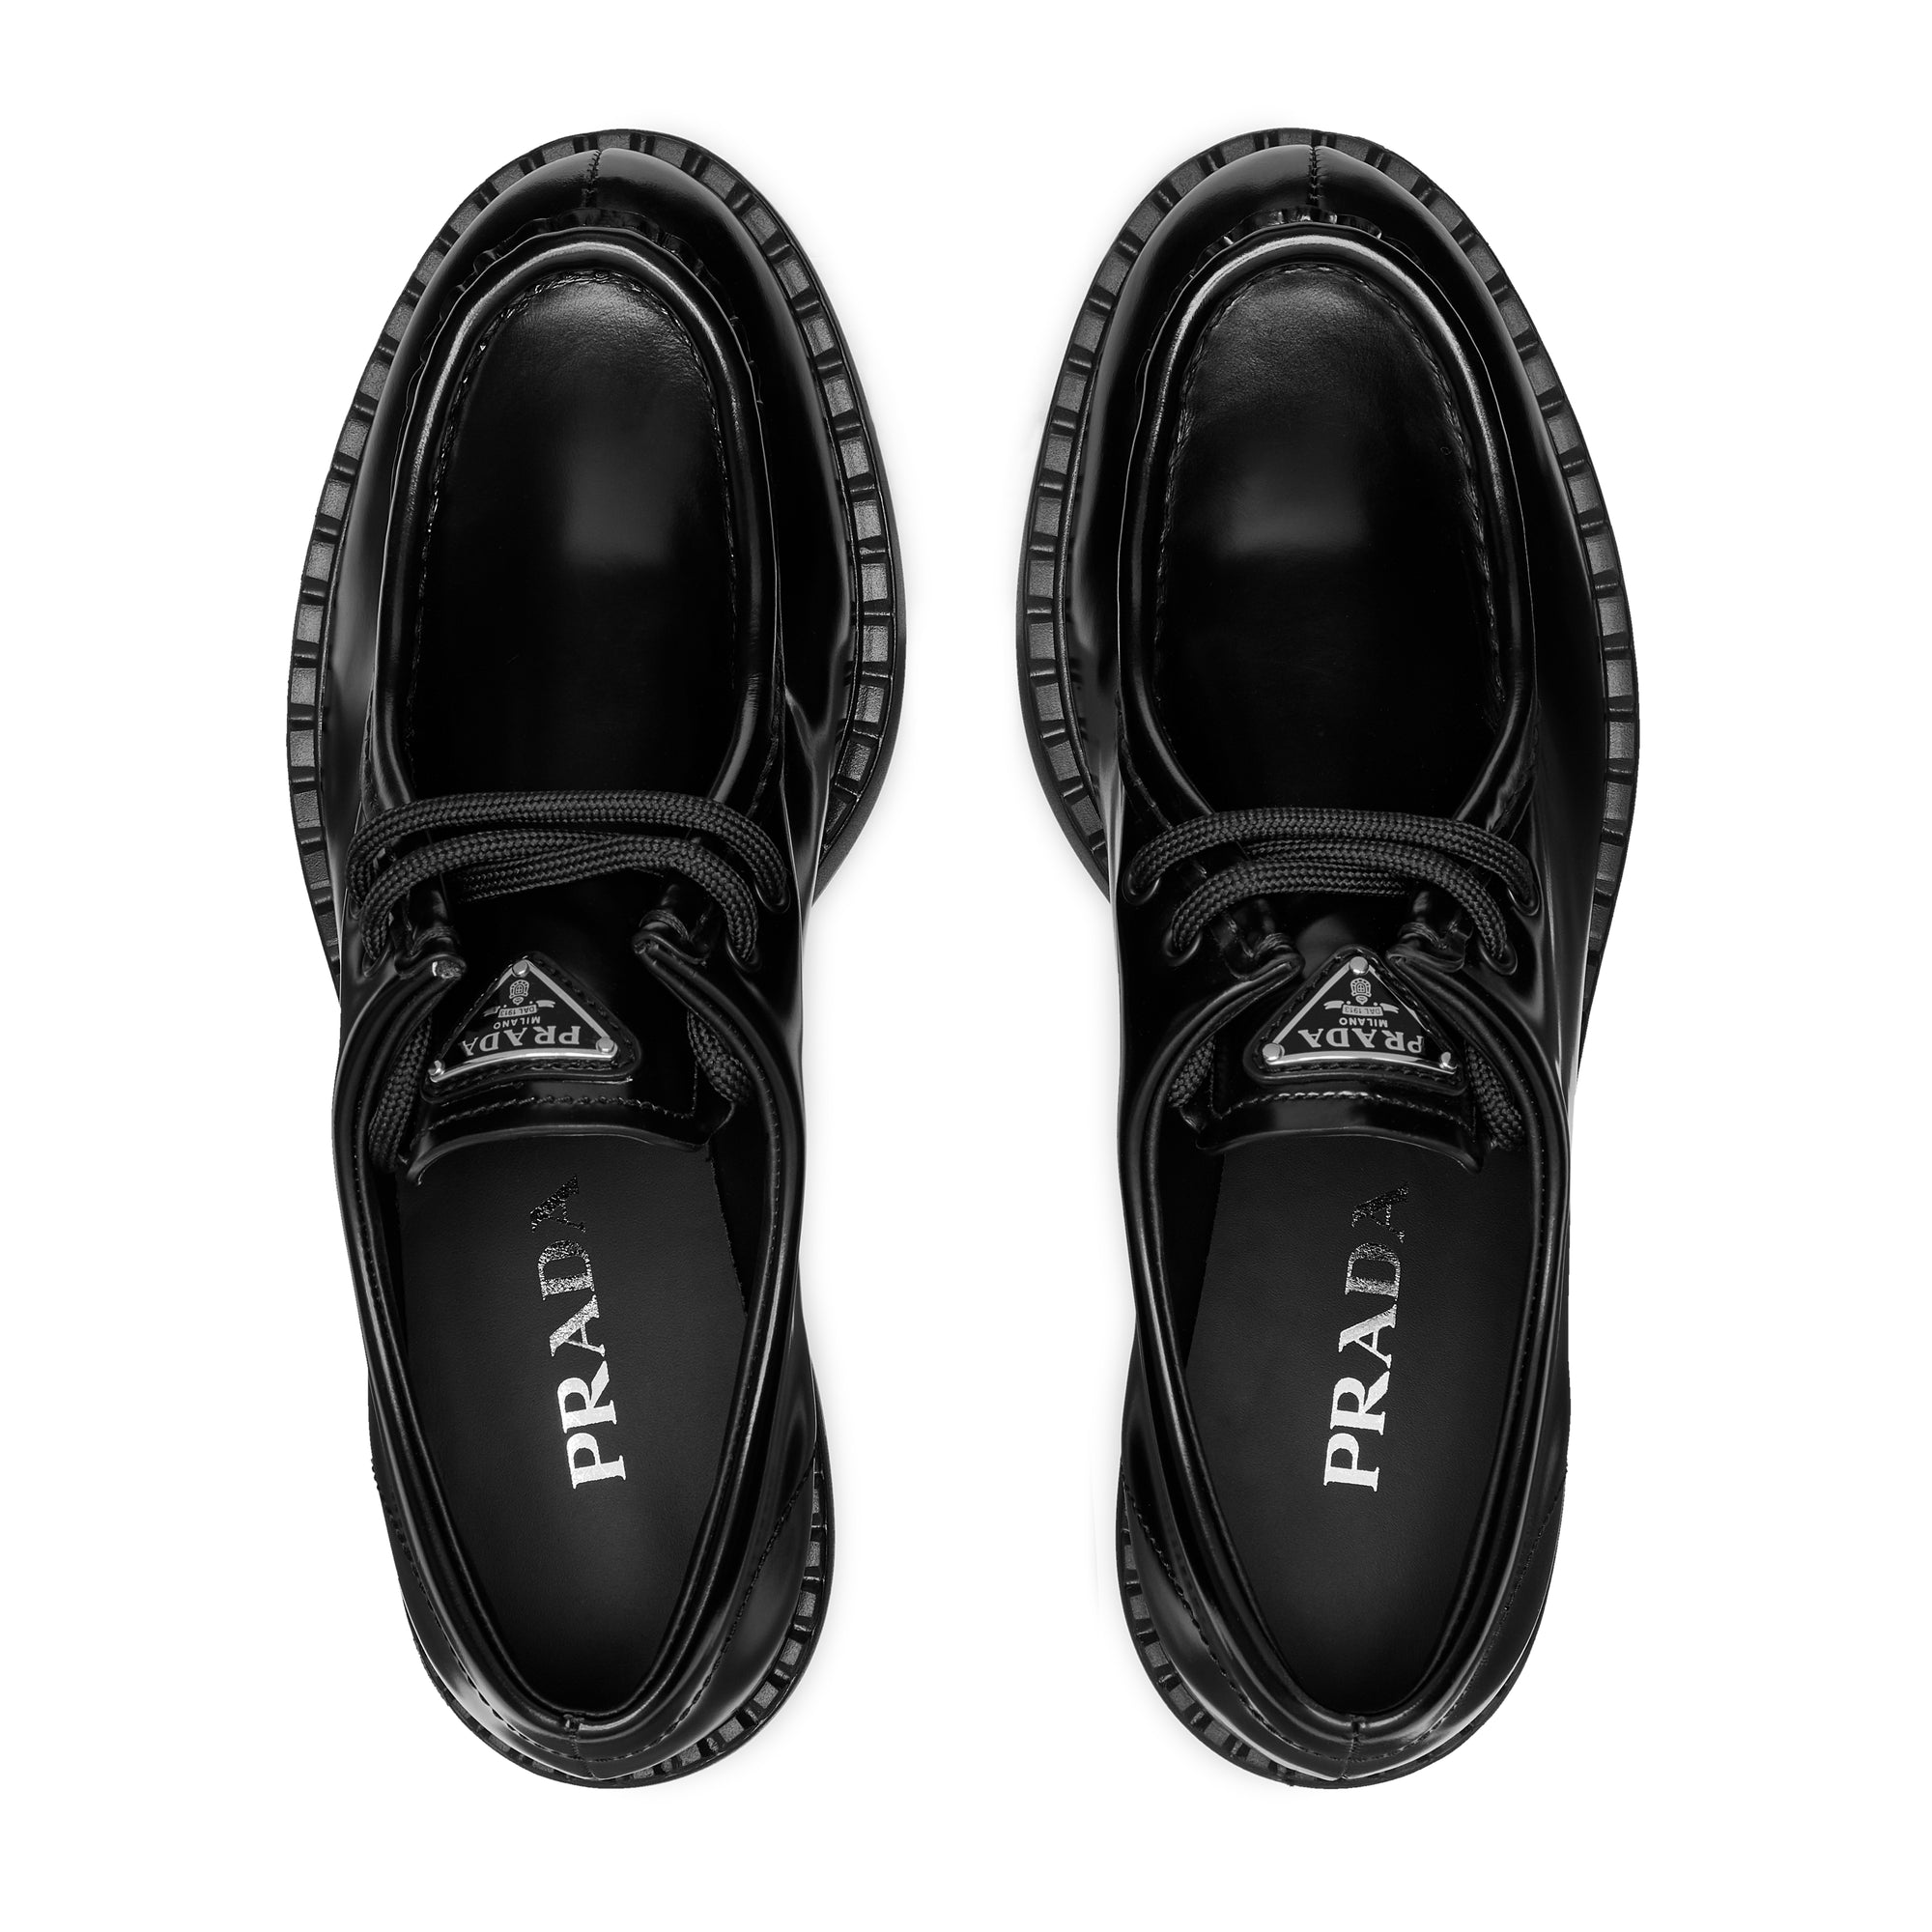 Prada - Women's Brushed Leather Lace-Up Shoes - (Nero) view 6